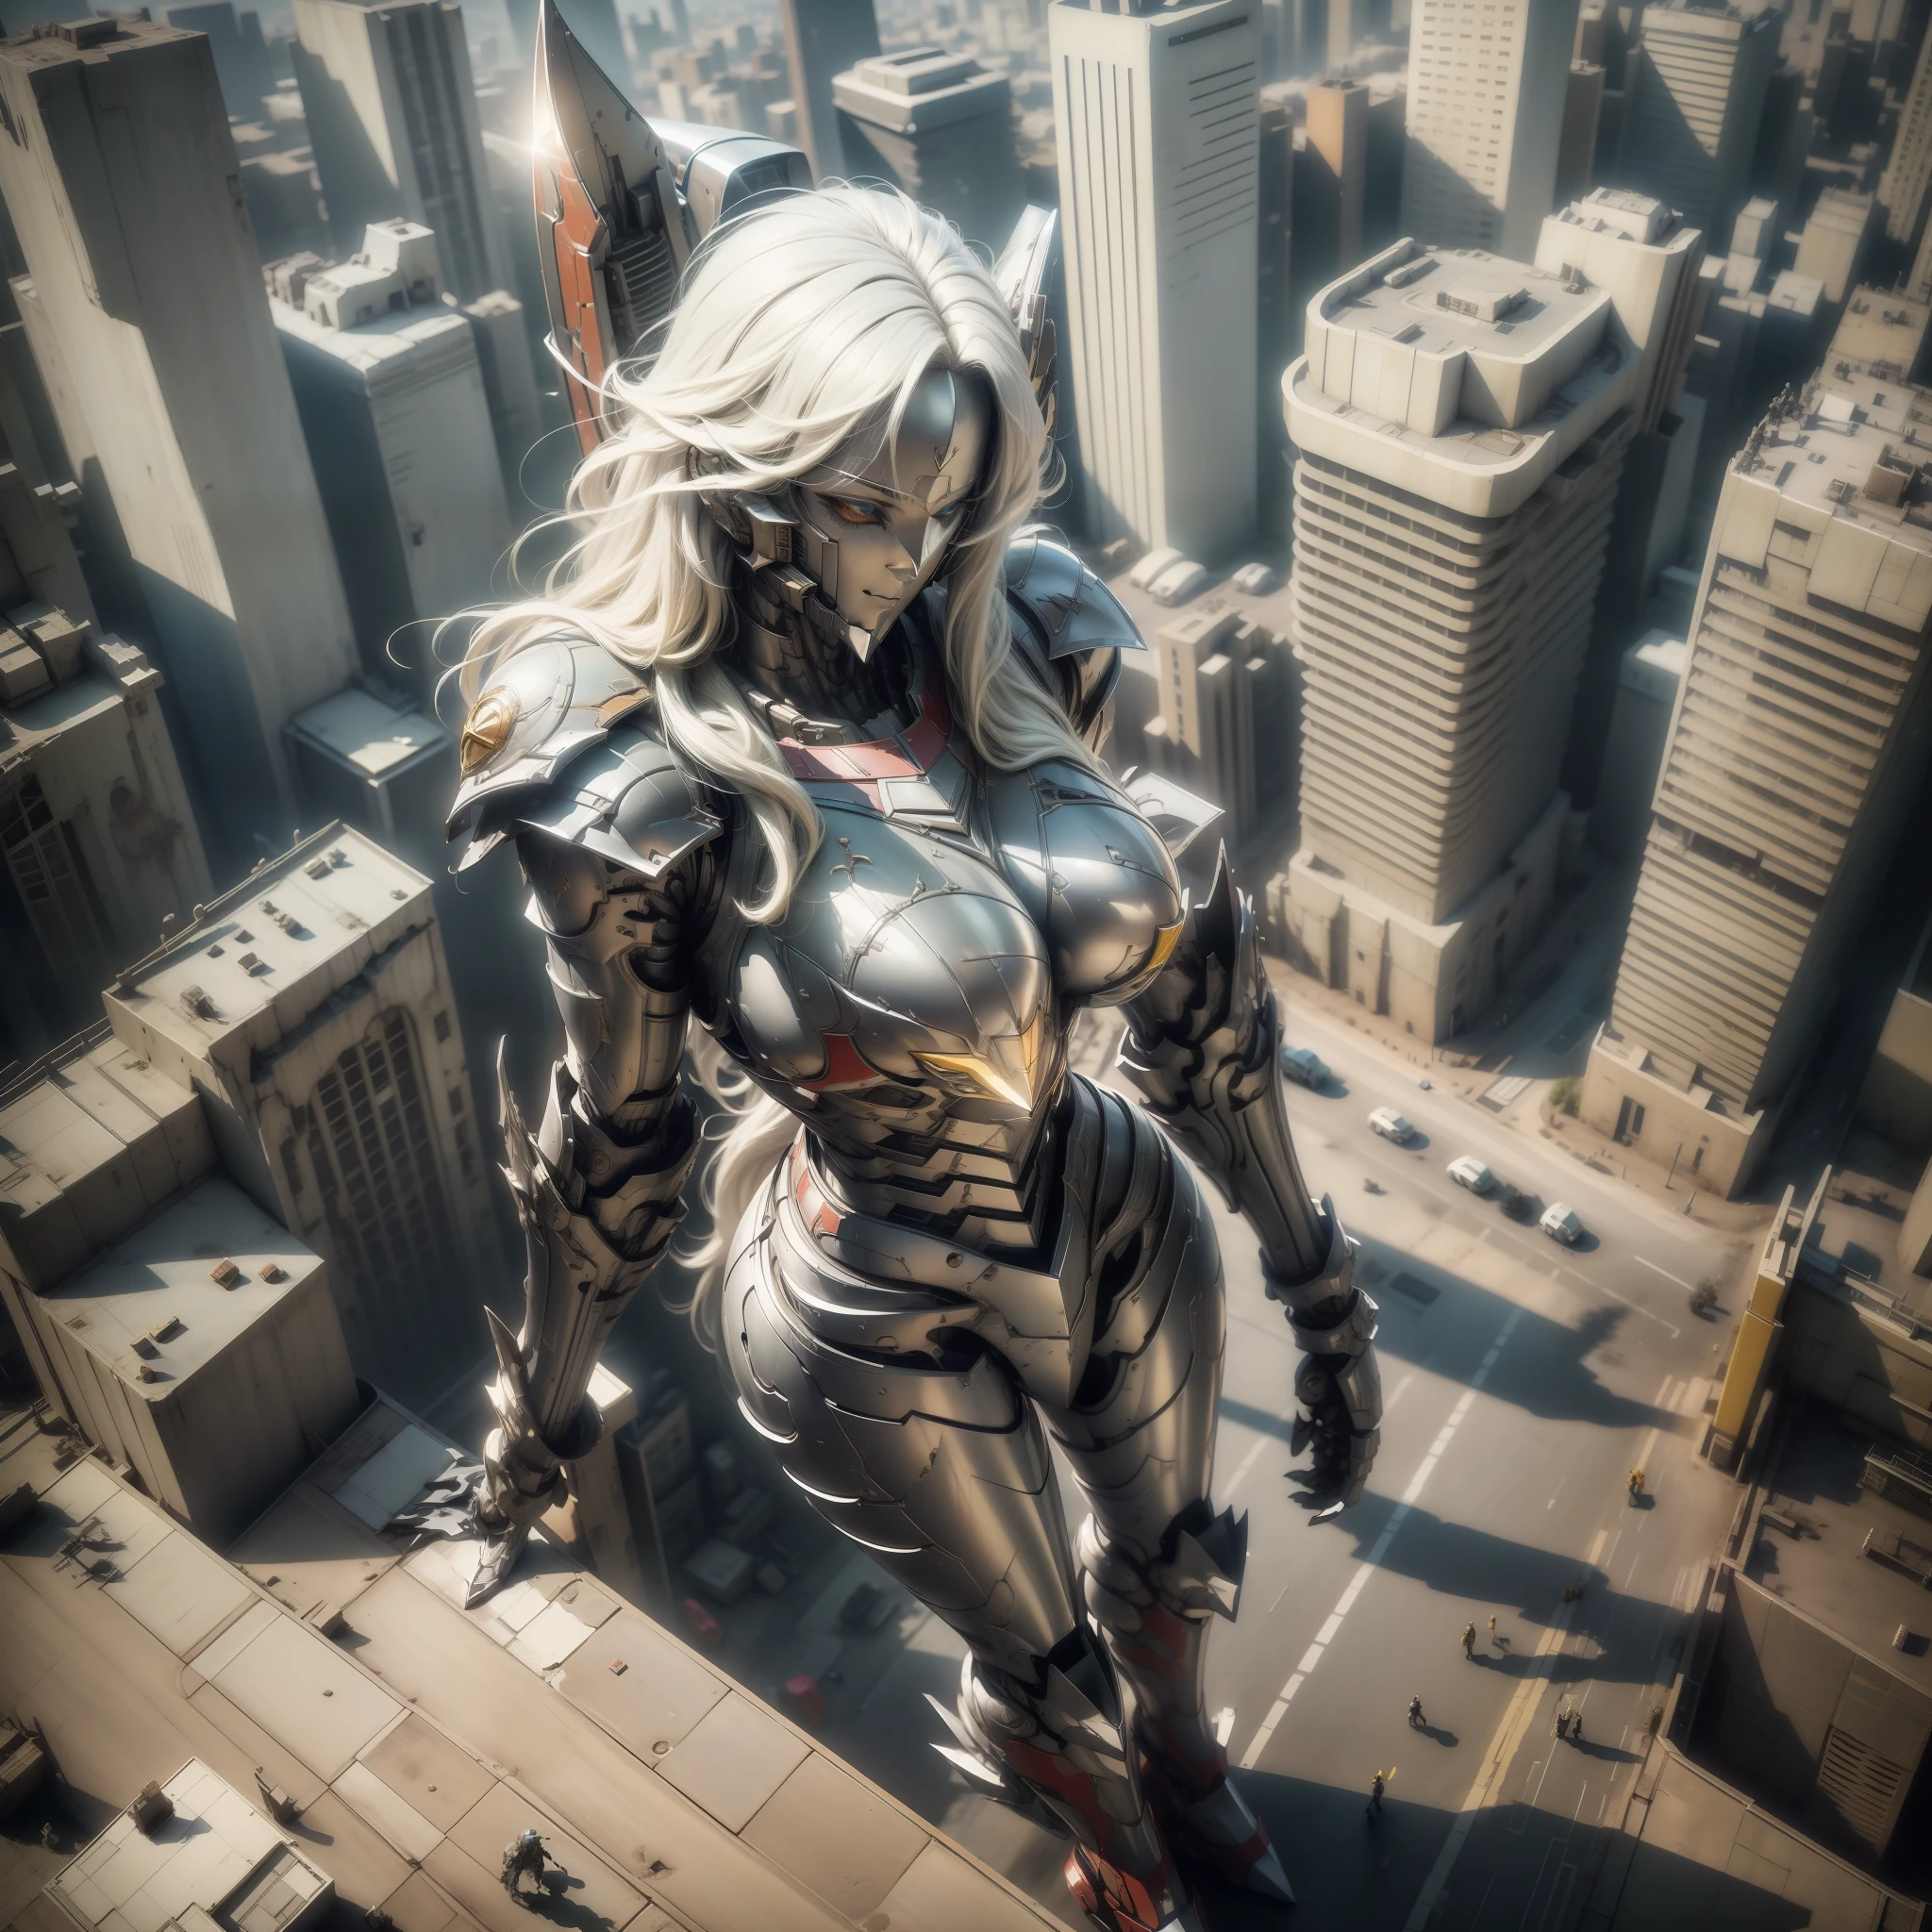 (Masterpiece, Superb Quality, Super Delicate, High Resolution), Male Focus, (((Mecha))), (((Mechanized))), (Body Details), (She Has Long White Hair, Big Breasts, Slim), (Standing Pose), Posing for Photos, Top-Down View, City Ruins, Background Details, (((Full Body)), From Above, Solo